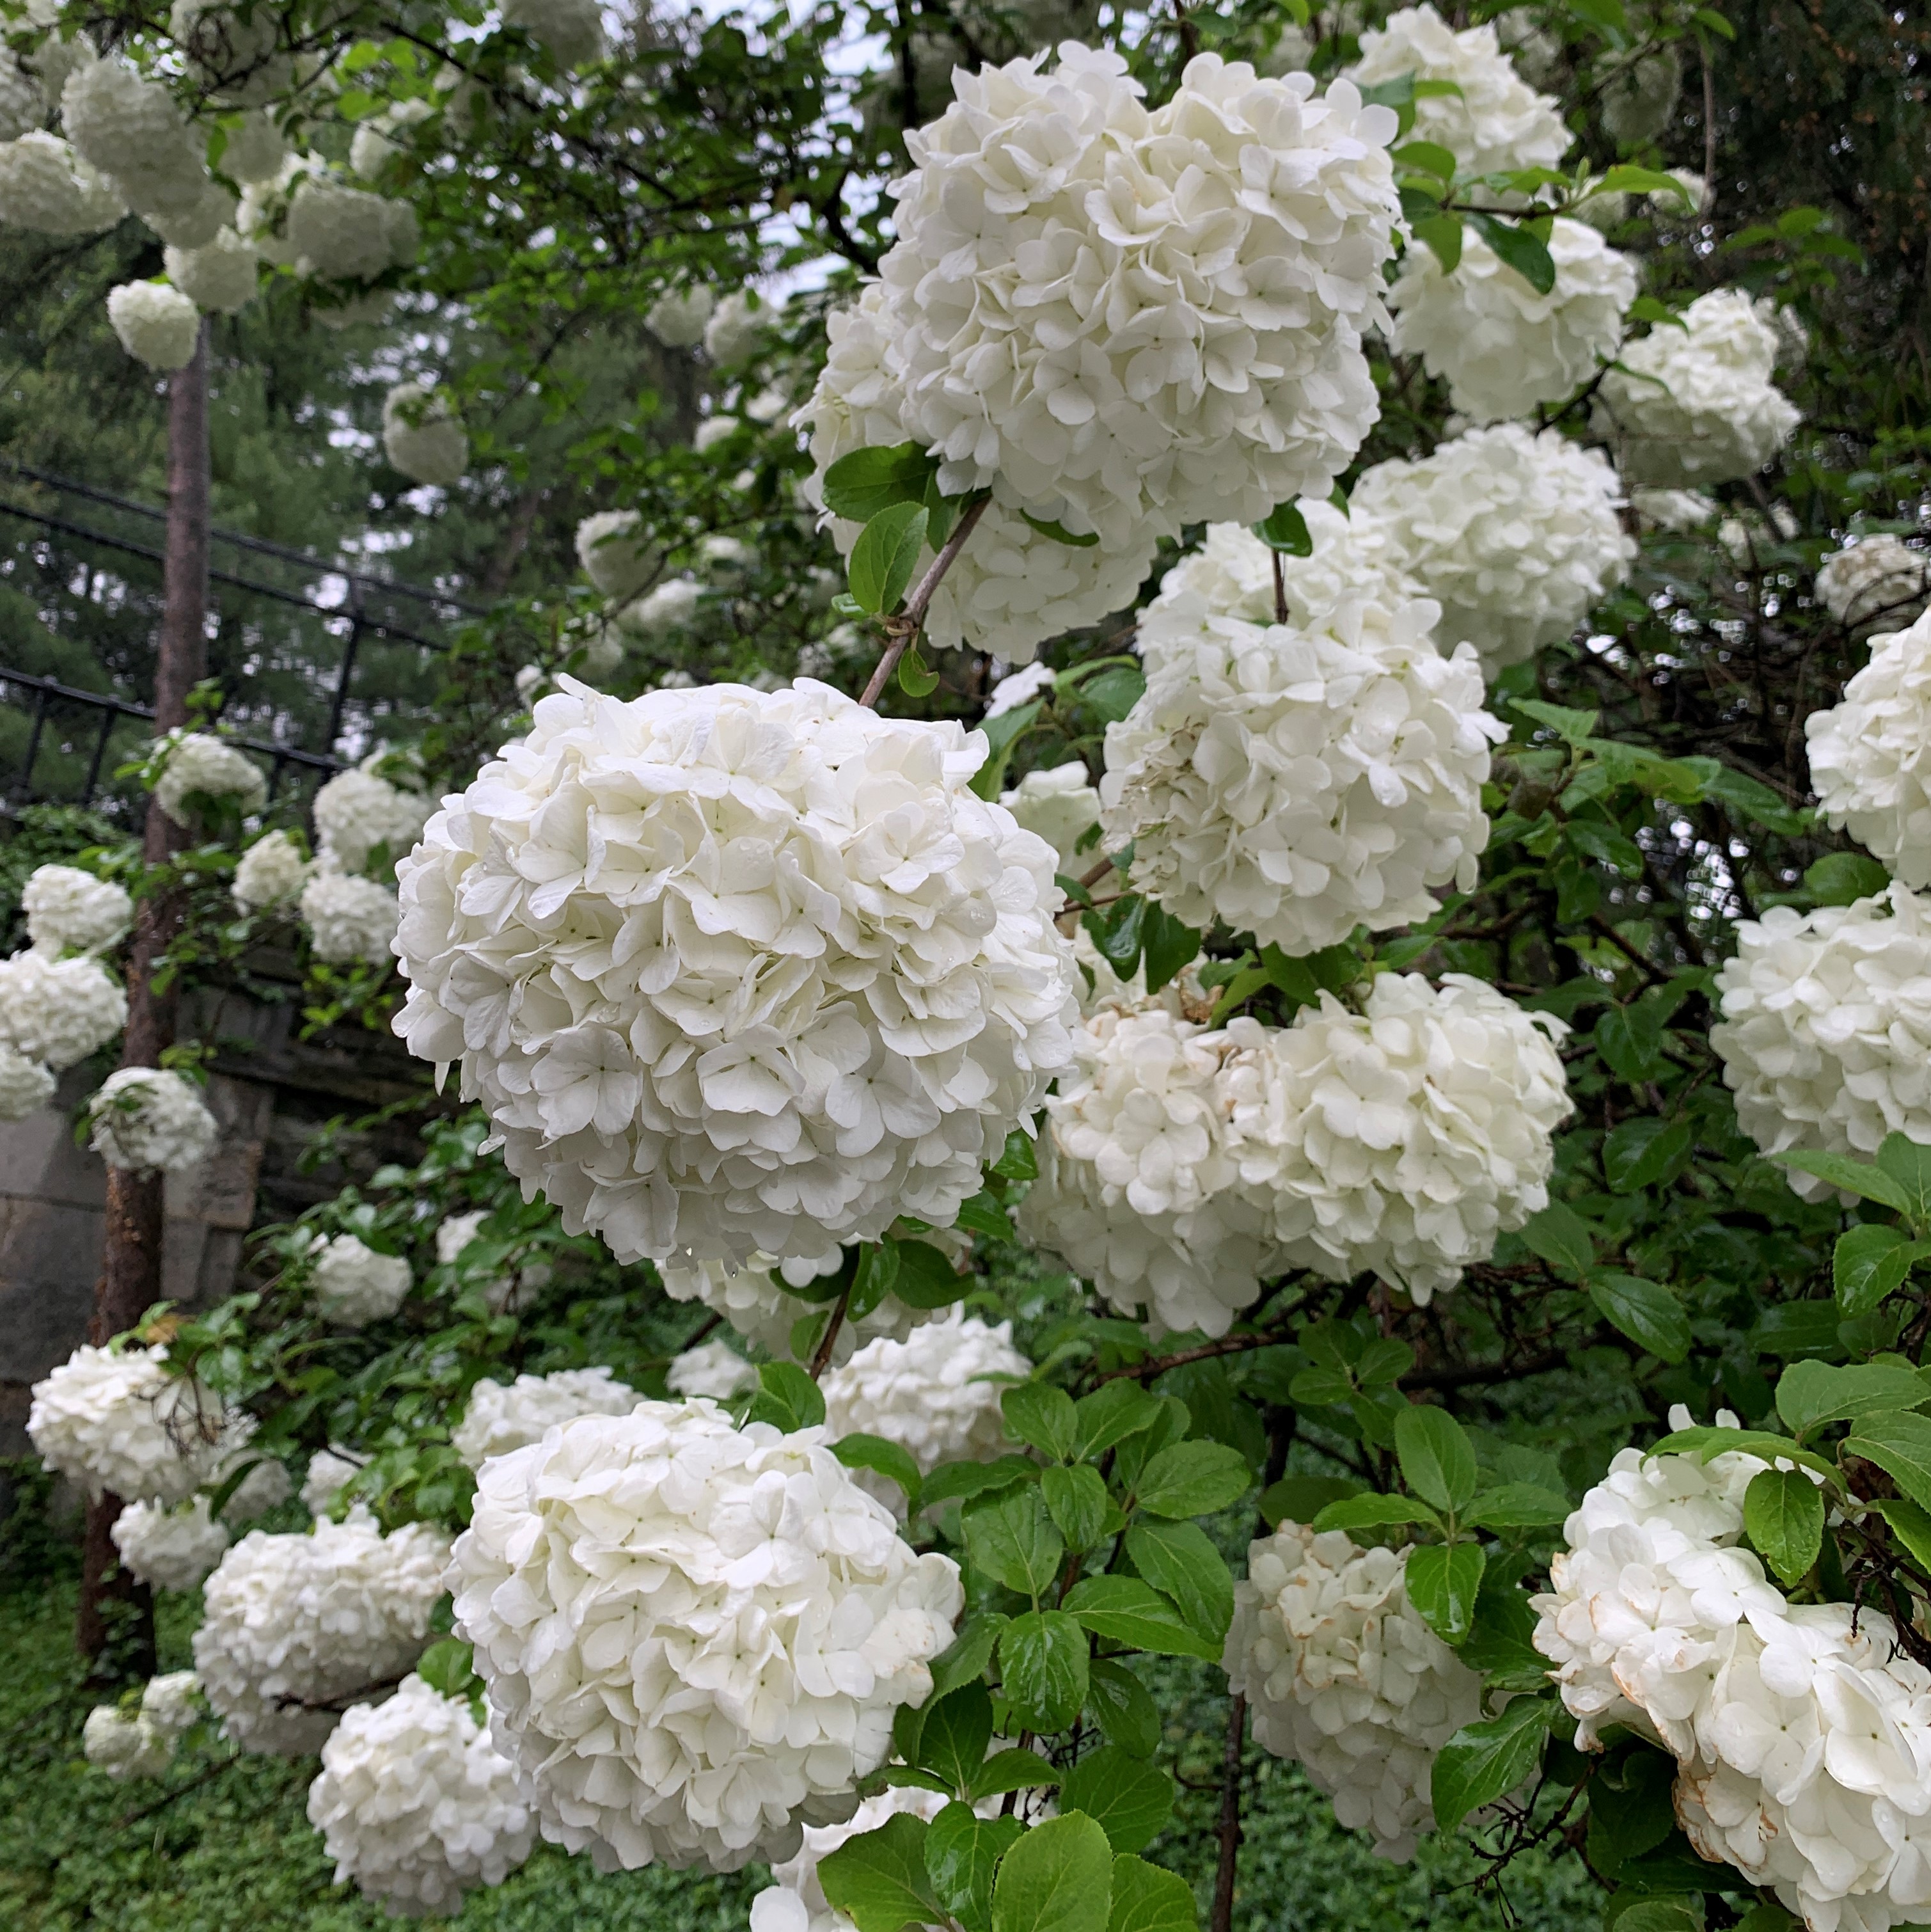 Snowball viburnum lives up to its name with huge round flower heads that look like snowballs. 